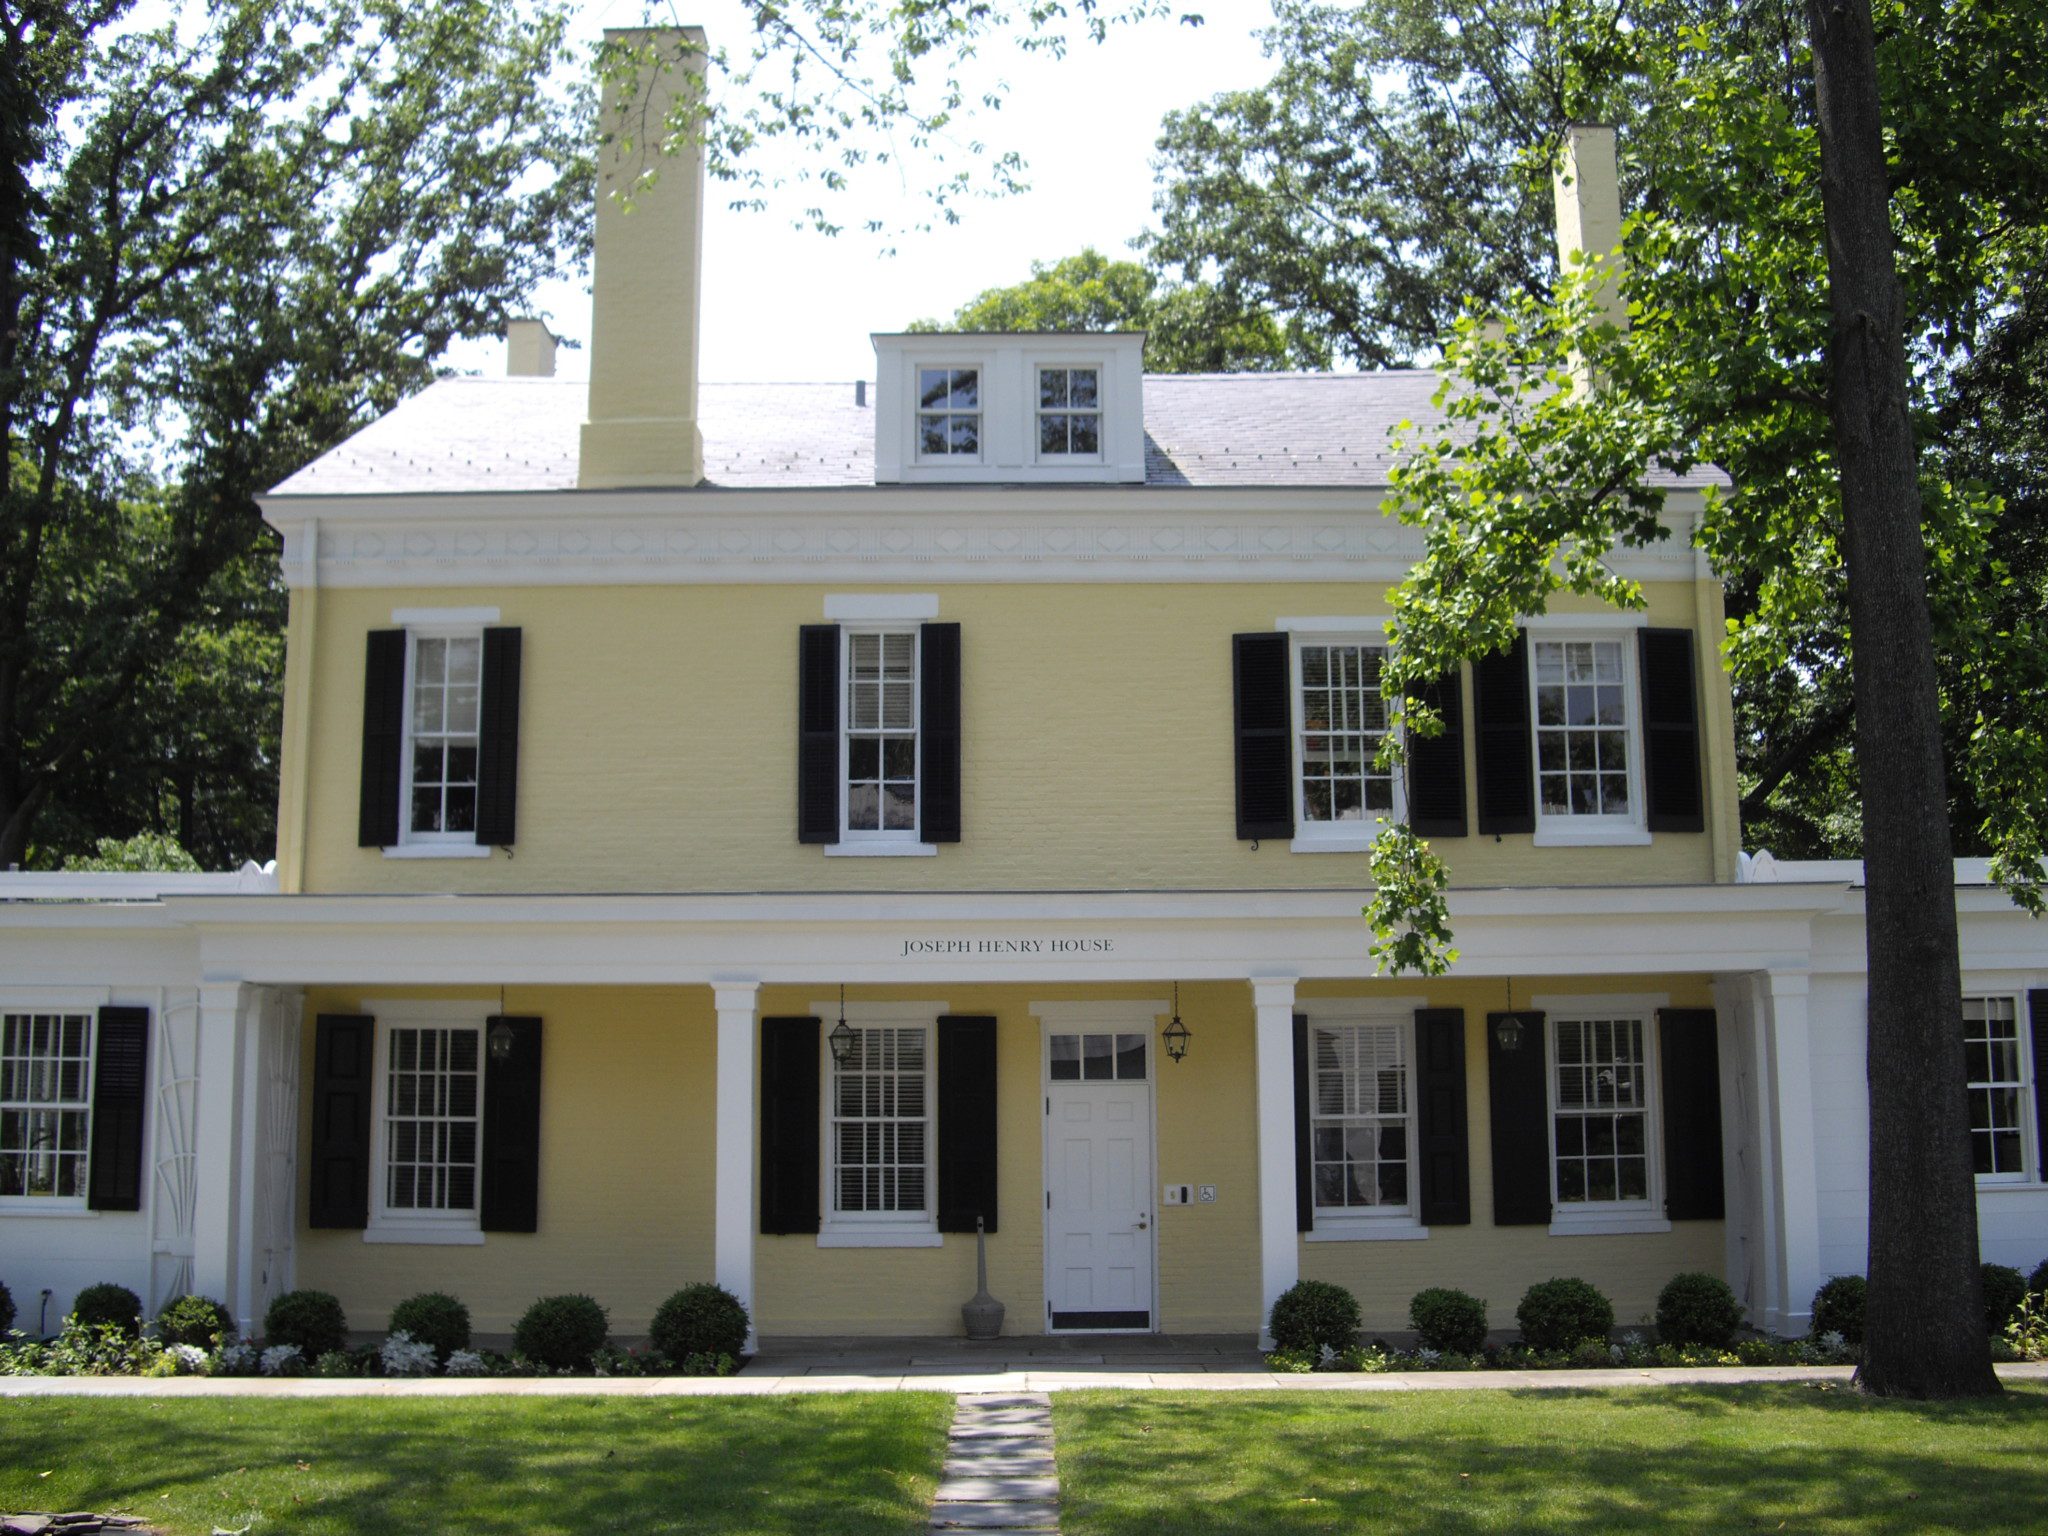 The Joseph Henry House is named after the noted physicist who taught at Princeton from 1832 to 1846, and may have been the leading American scientist of his time.